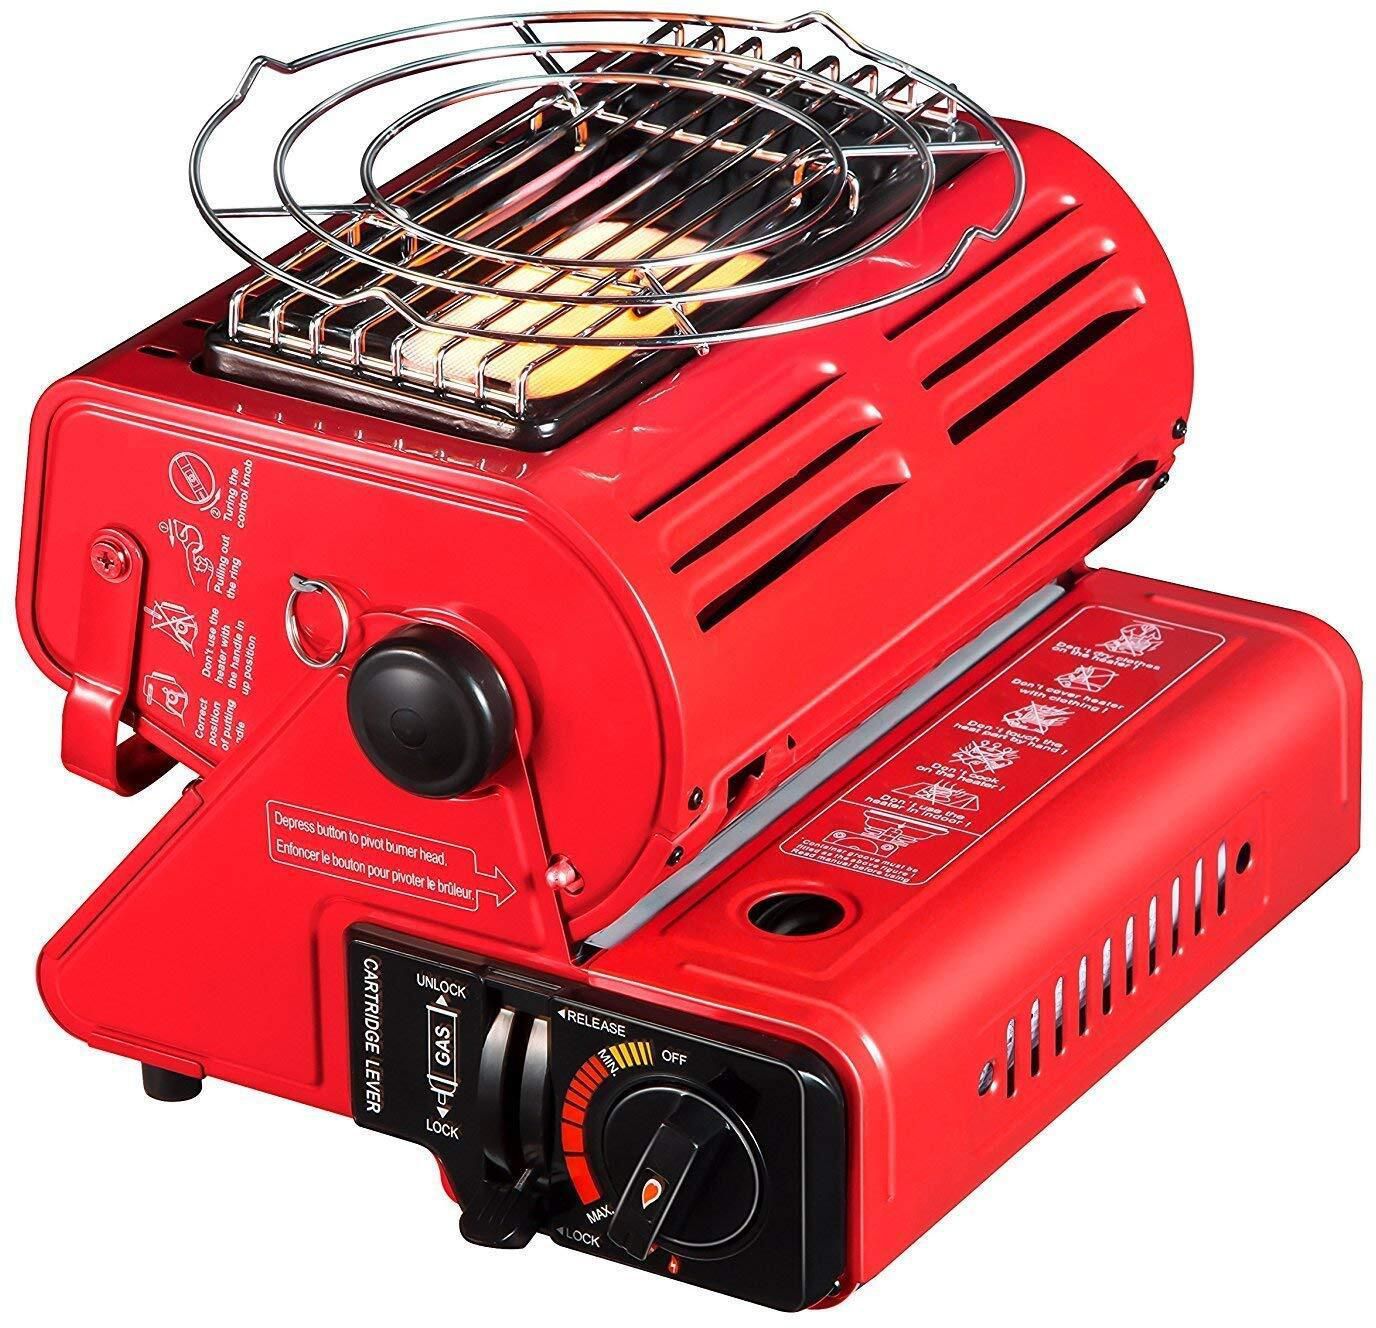 GOTOCAMPS Portable Butane Gas Tent Heater with Camping stove. 